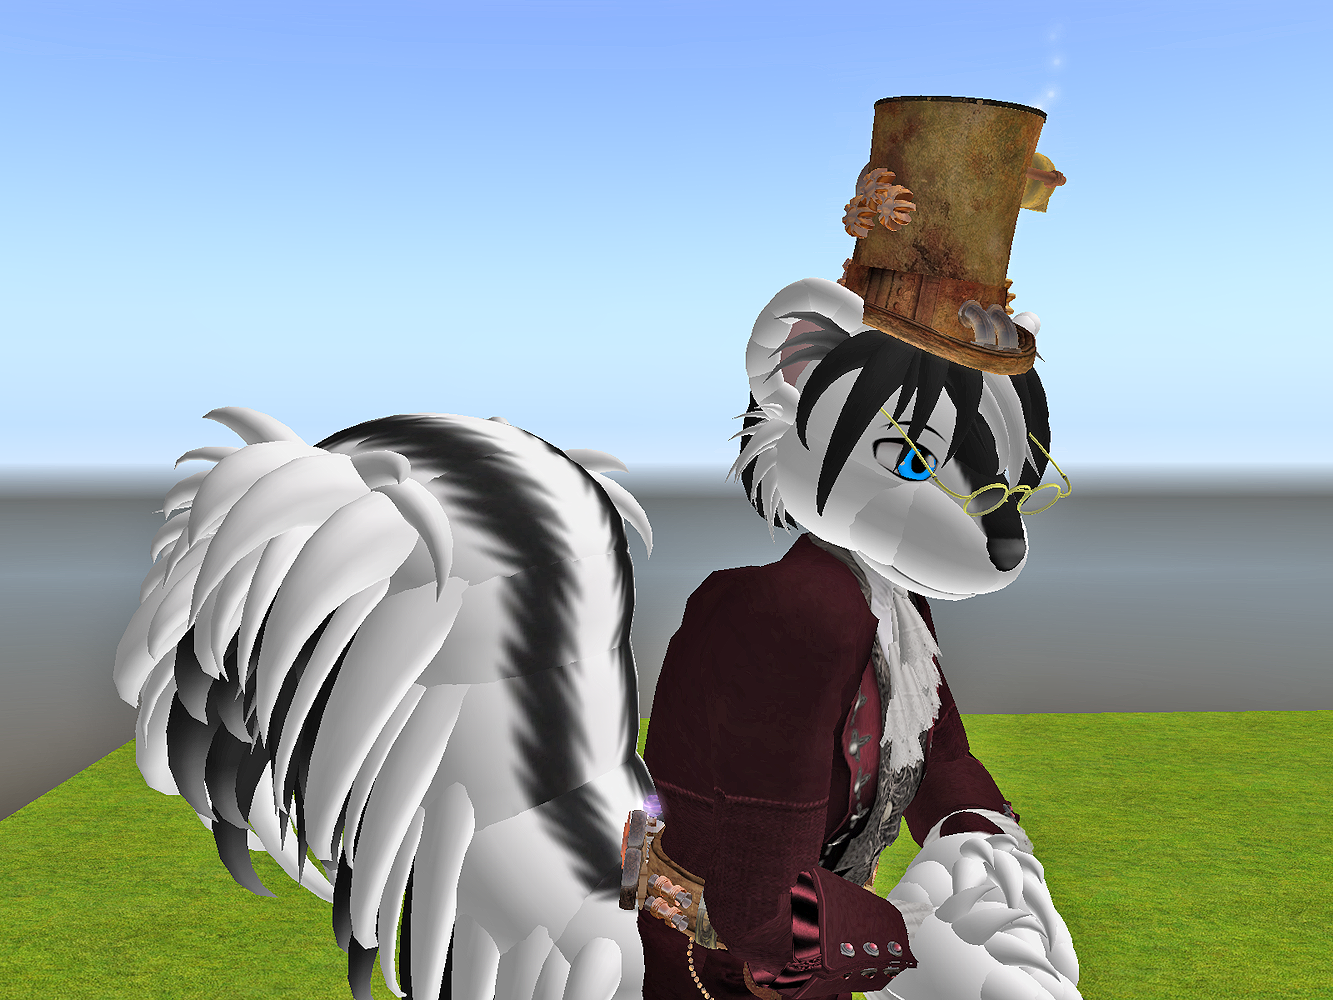 Roger at second life 1